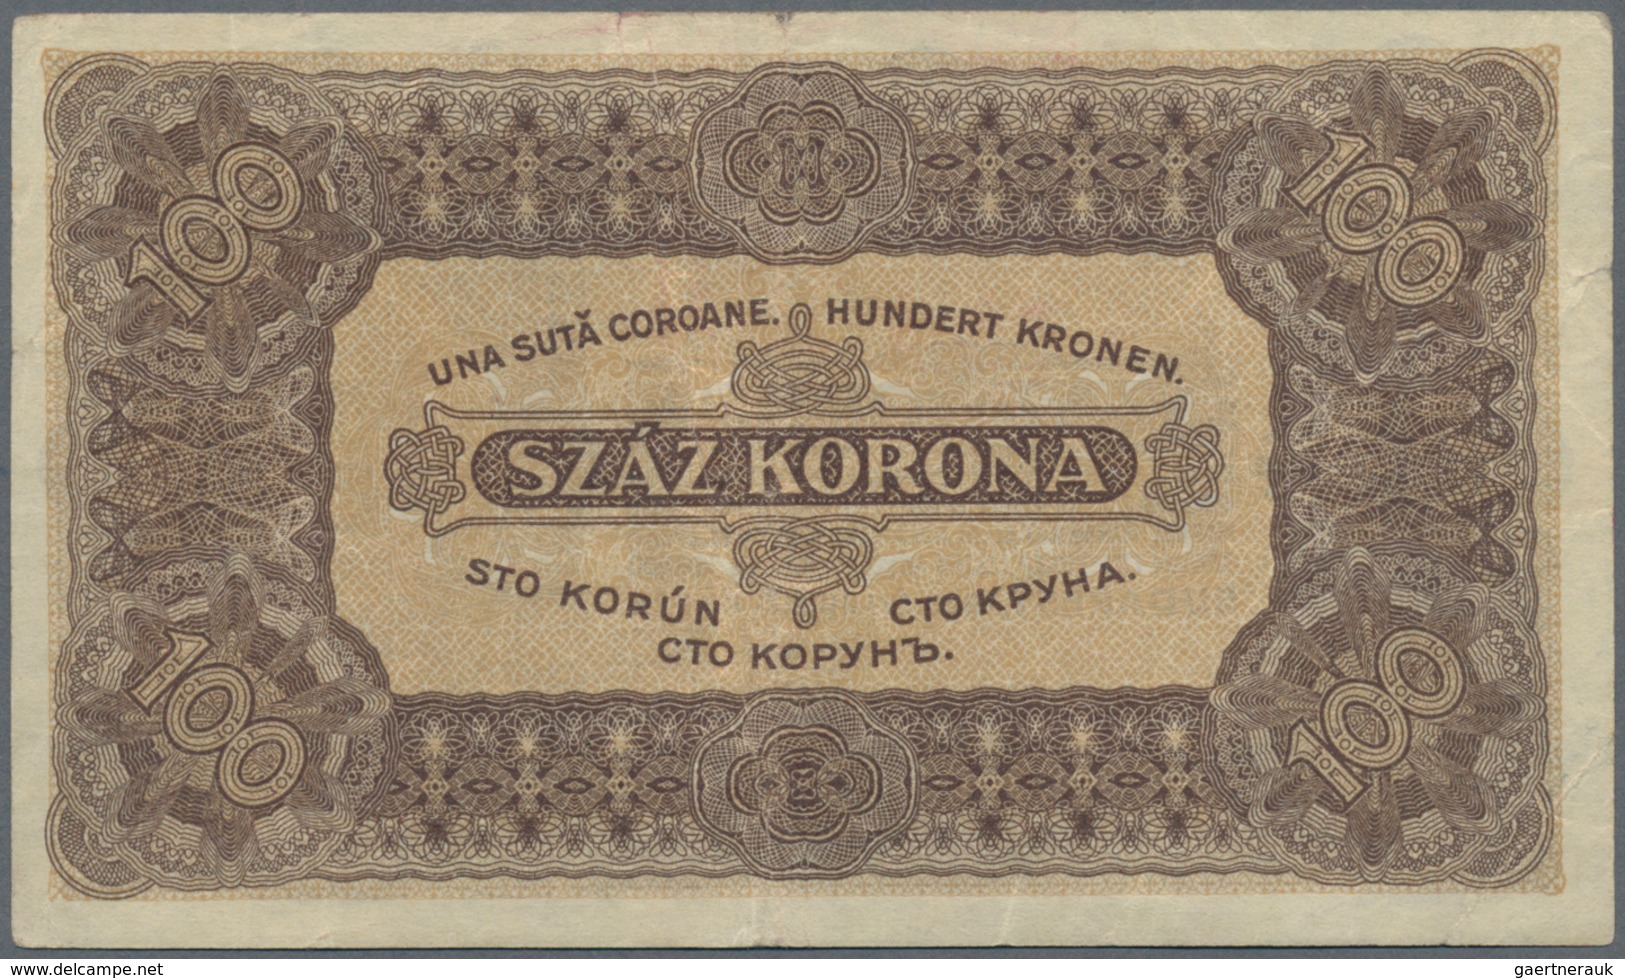 Hungary / Ungarn: Ministry of Finance, set with 11 banknotes comprising 2x 100 Korona P.73a,b (UNC,